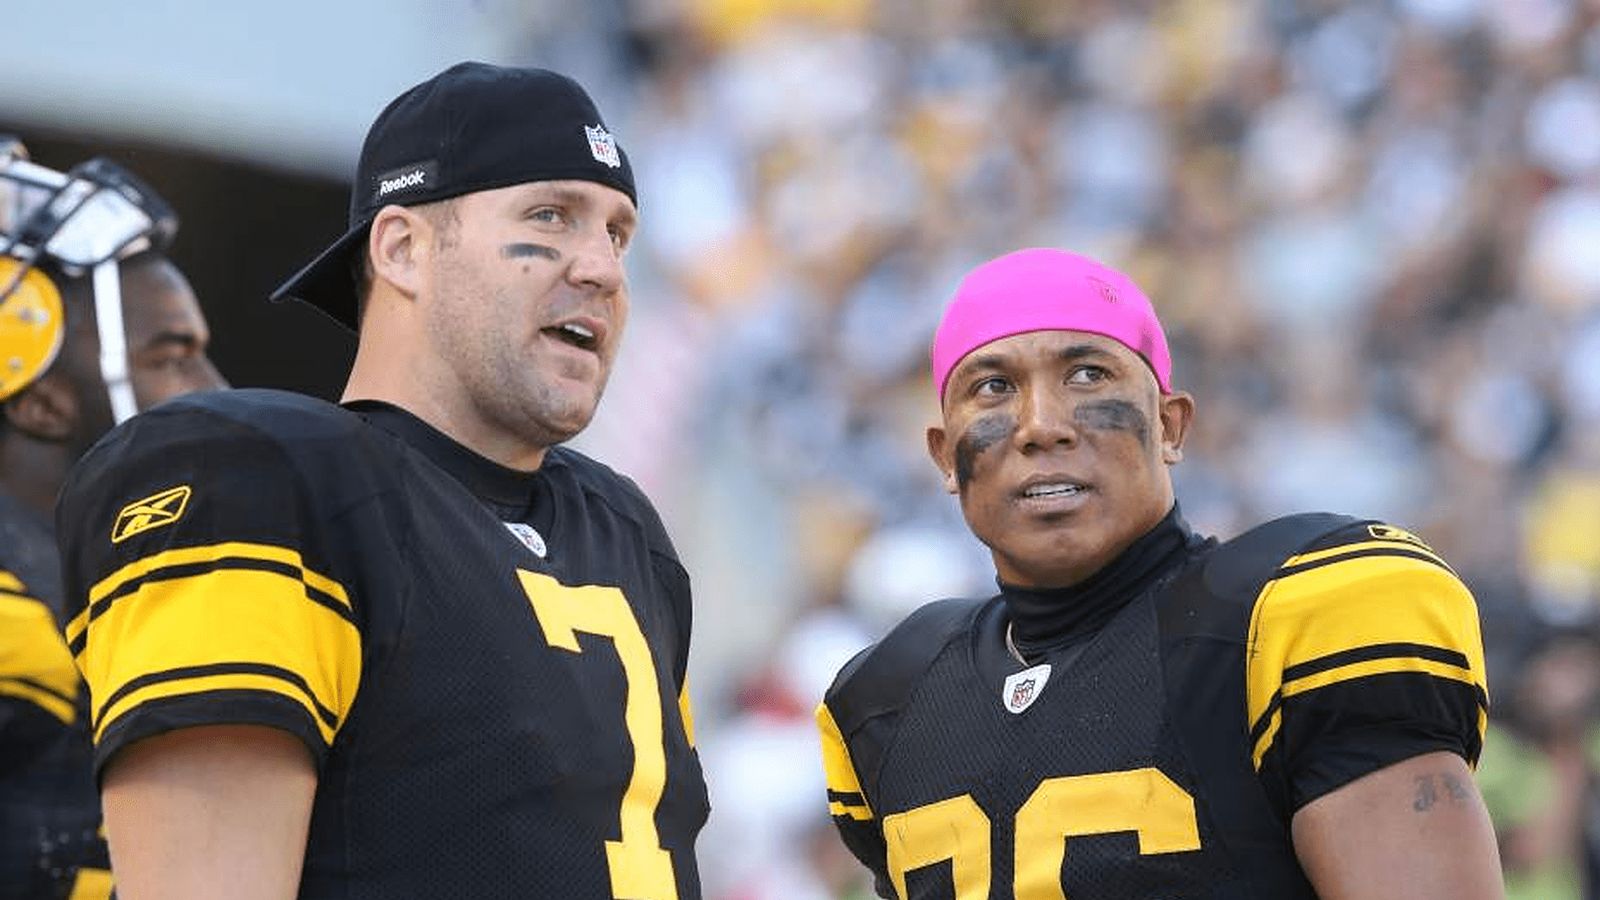 Steelers Legendary WR Hines Ward Reveals the Real Reason Why He